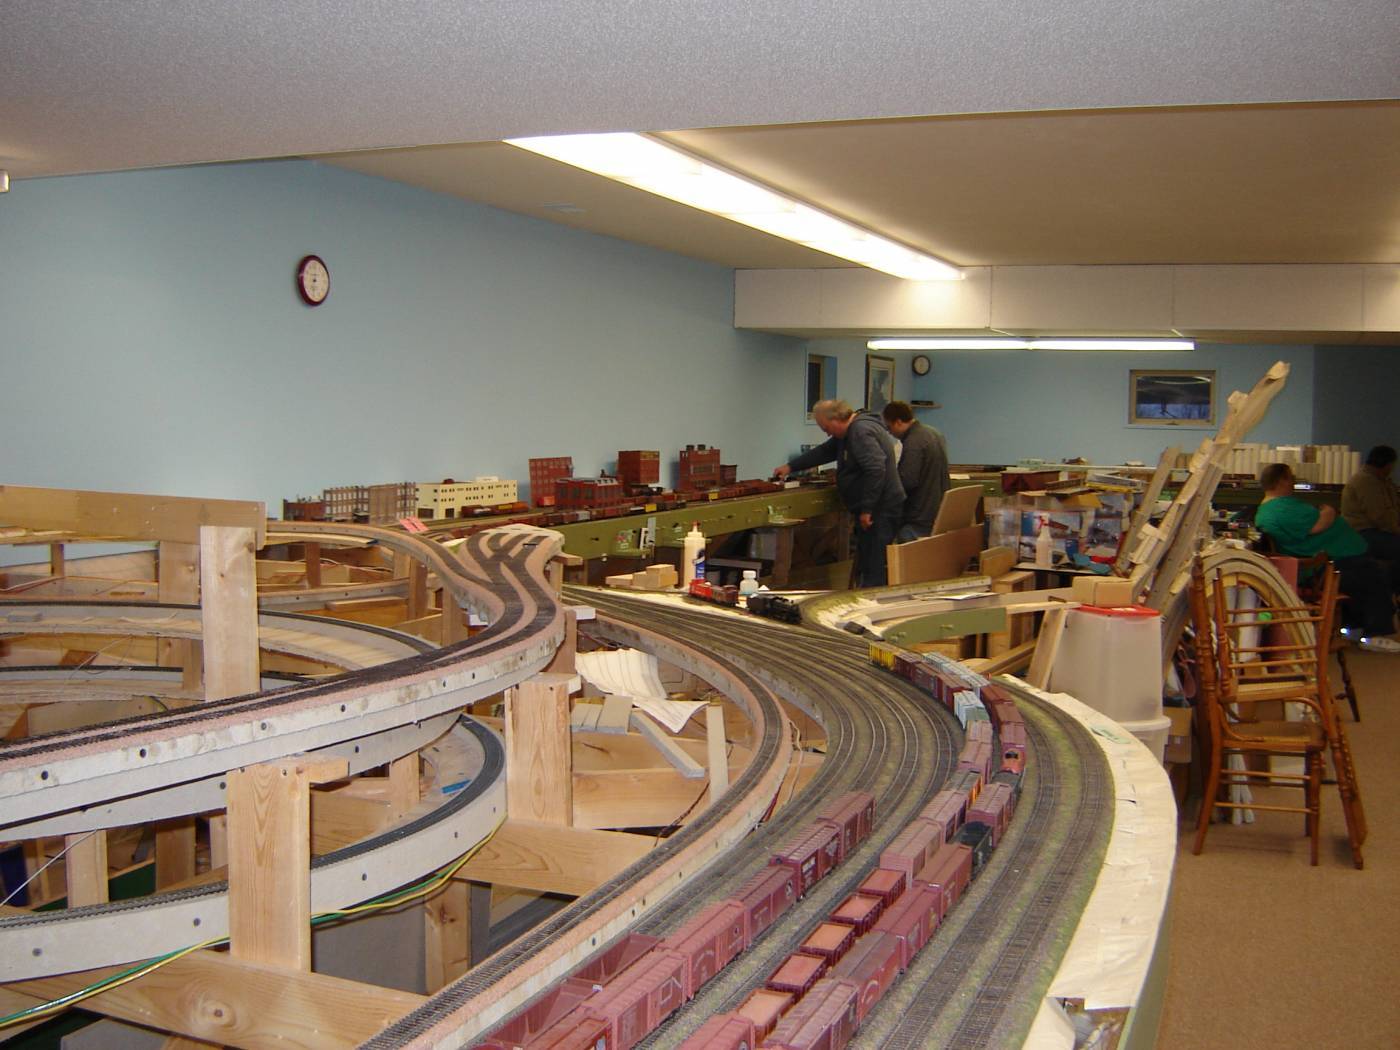 Model Train Benchwork and Roadbed Construction